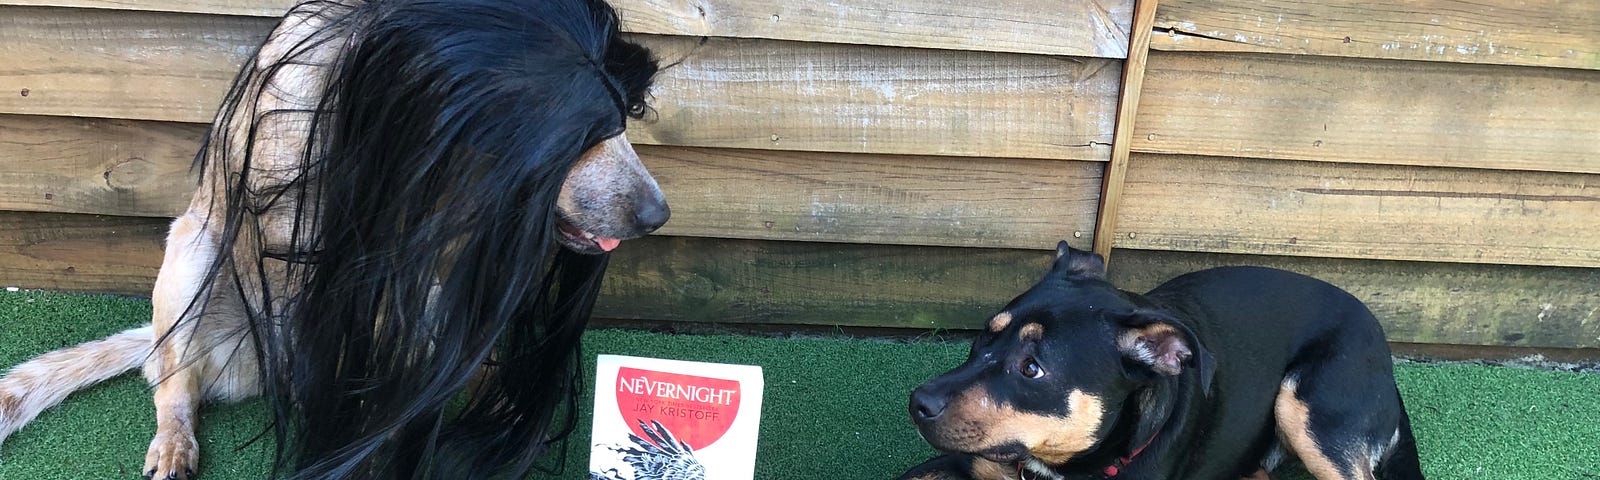 A red dog wearing a black wig, copy of Nevernight, and a small black dog looking uncomfortable